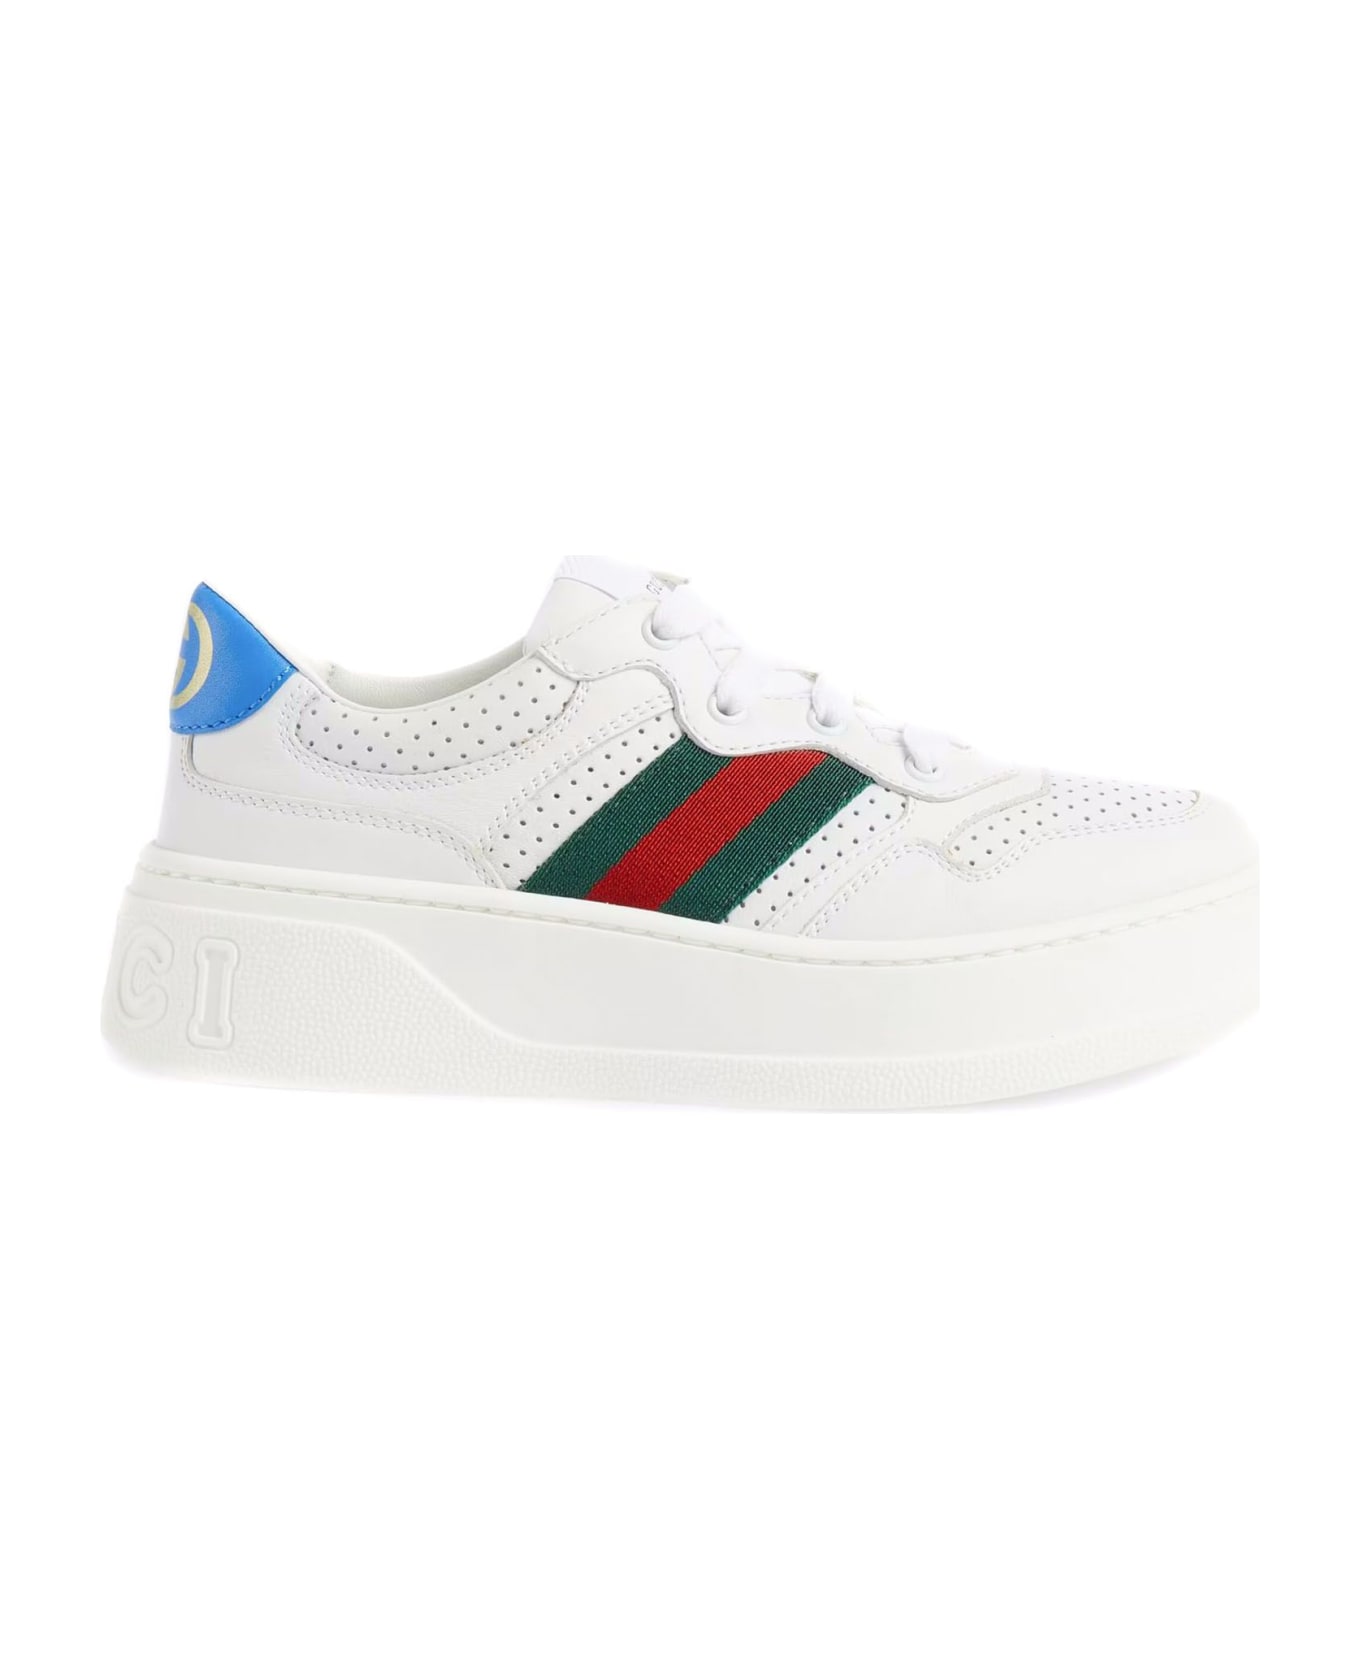 Gucci White Leather Sneakers シューズ